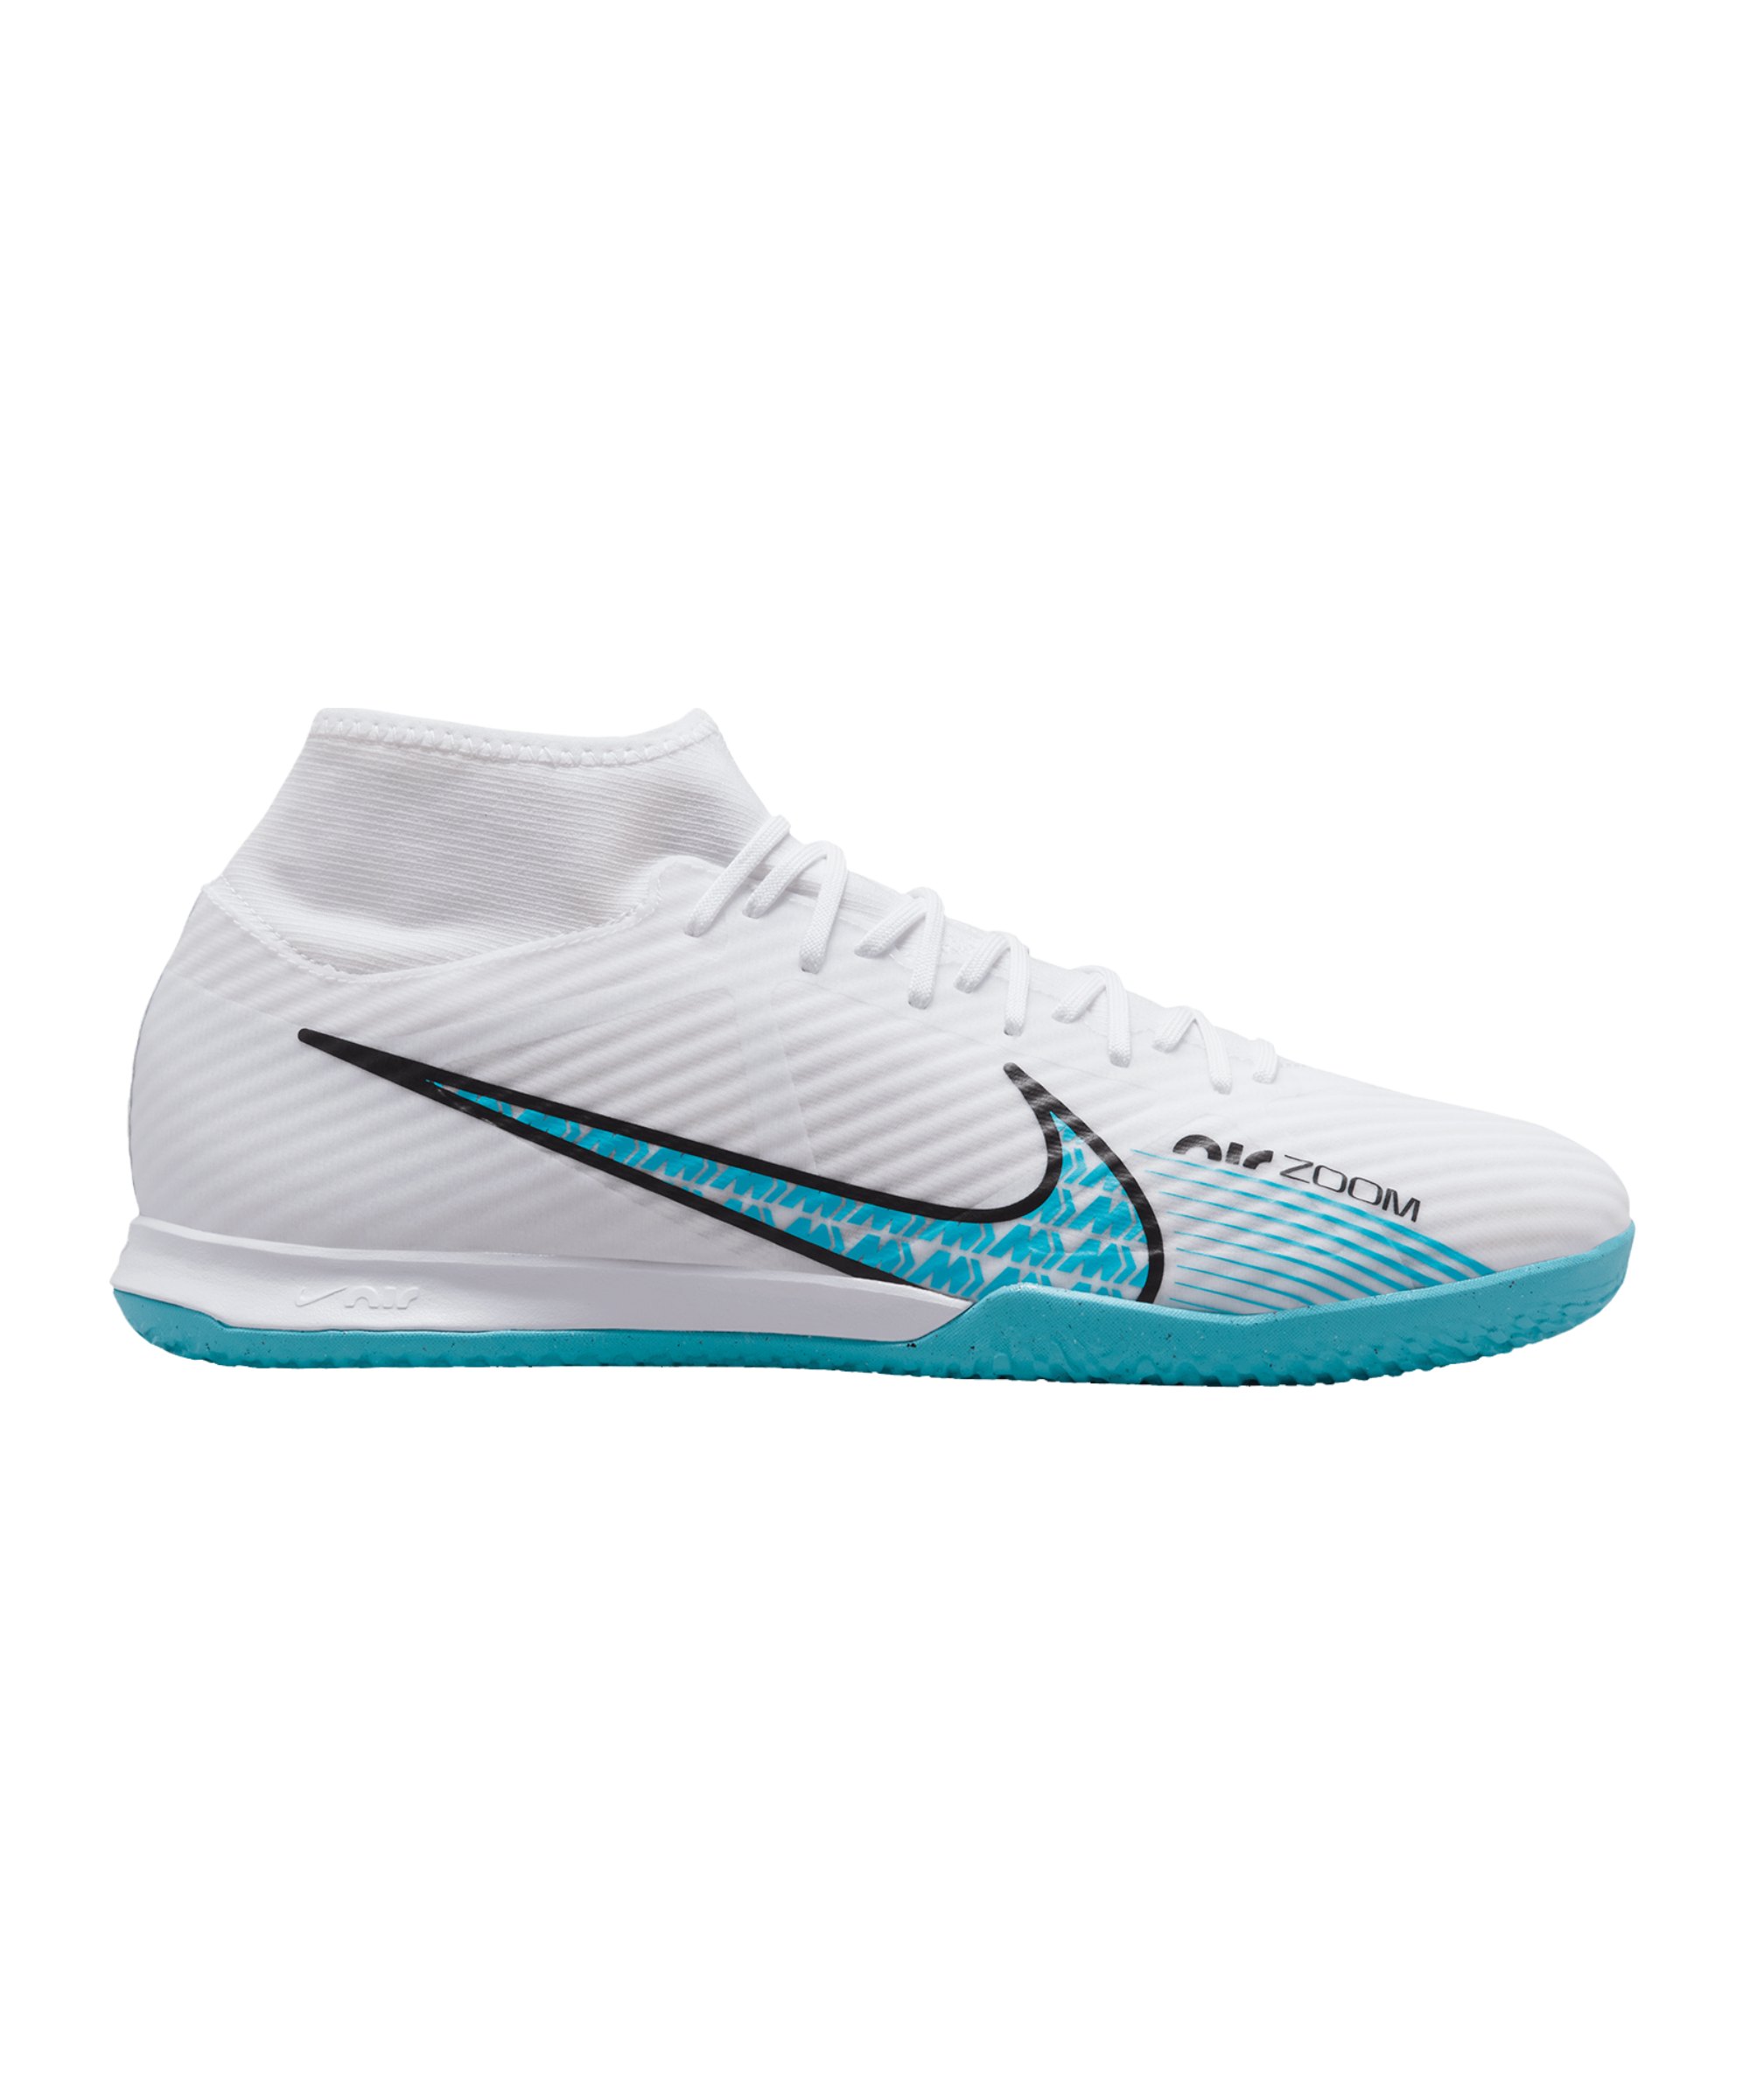 Nike Air Zoom Superfly IX Academy IC Halle F146 weiss